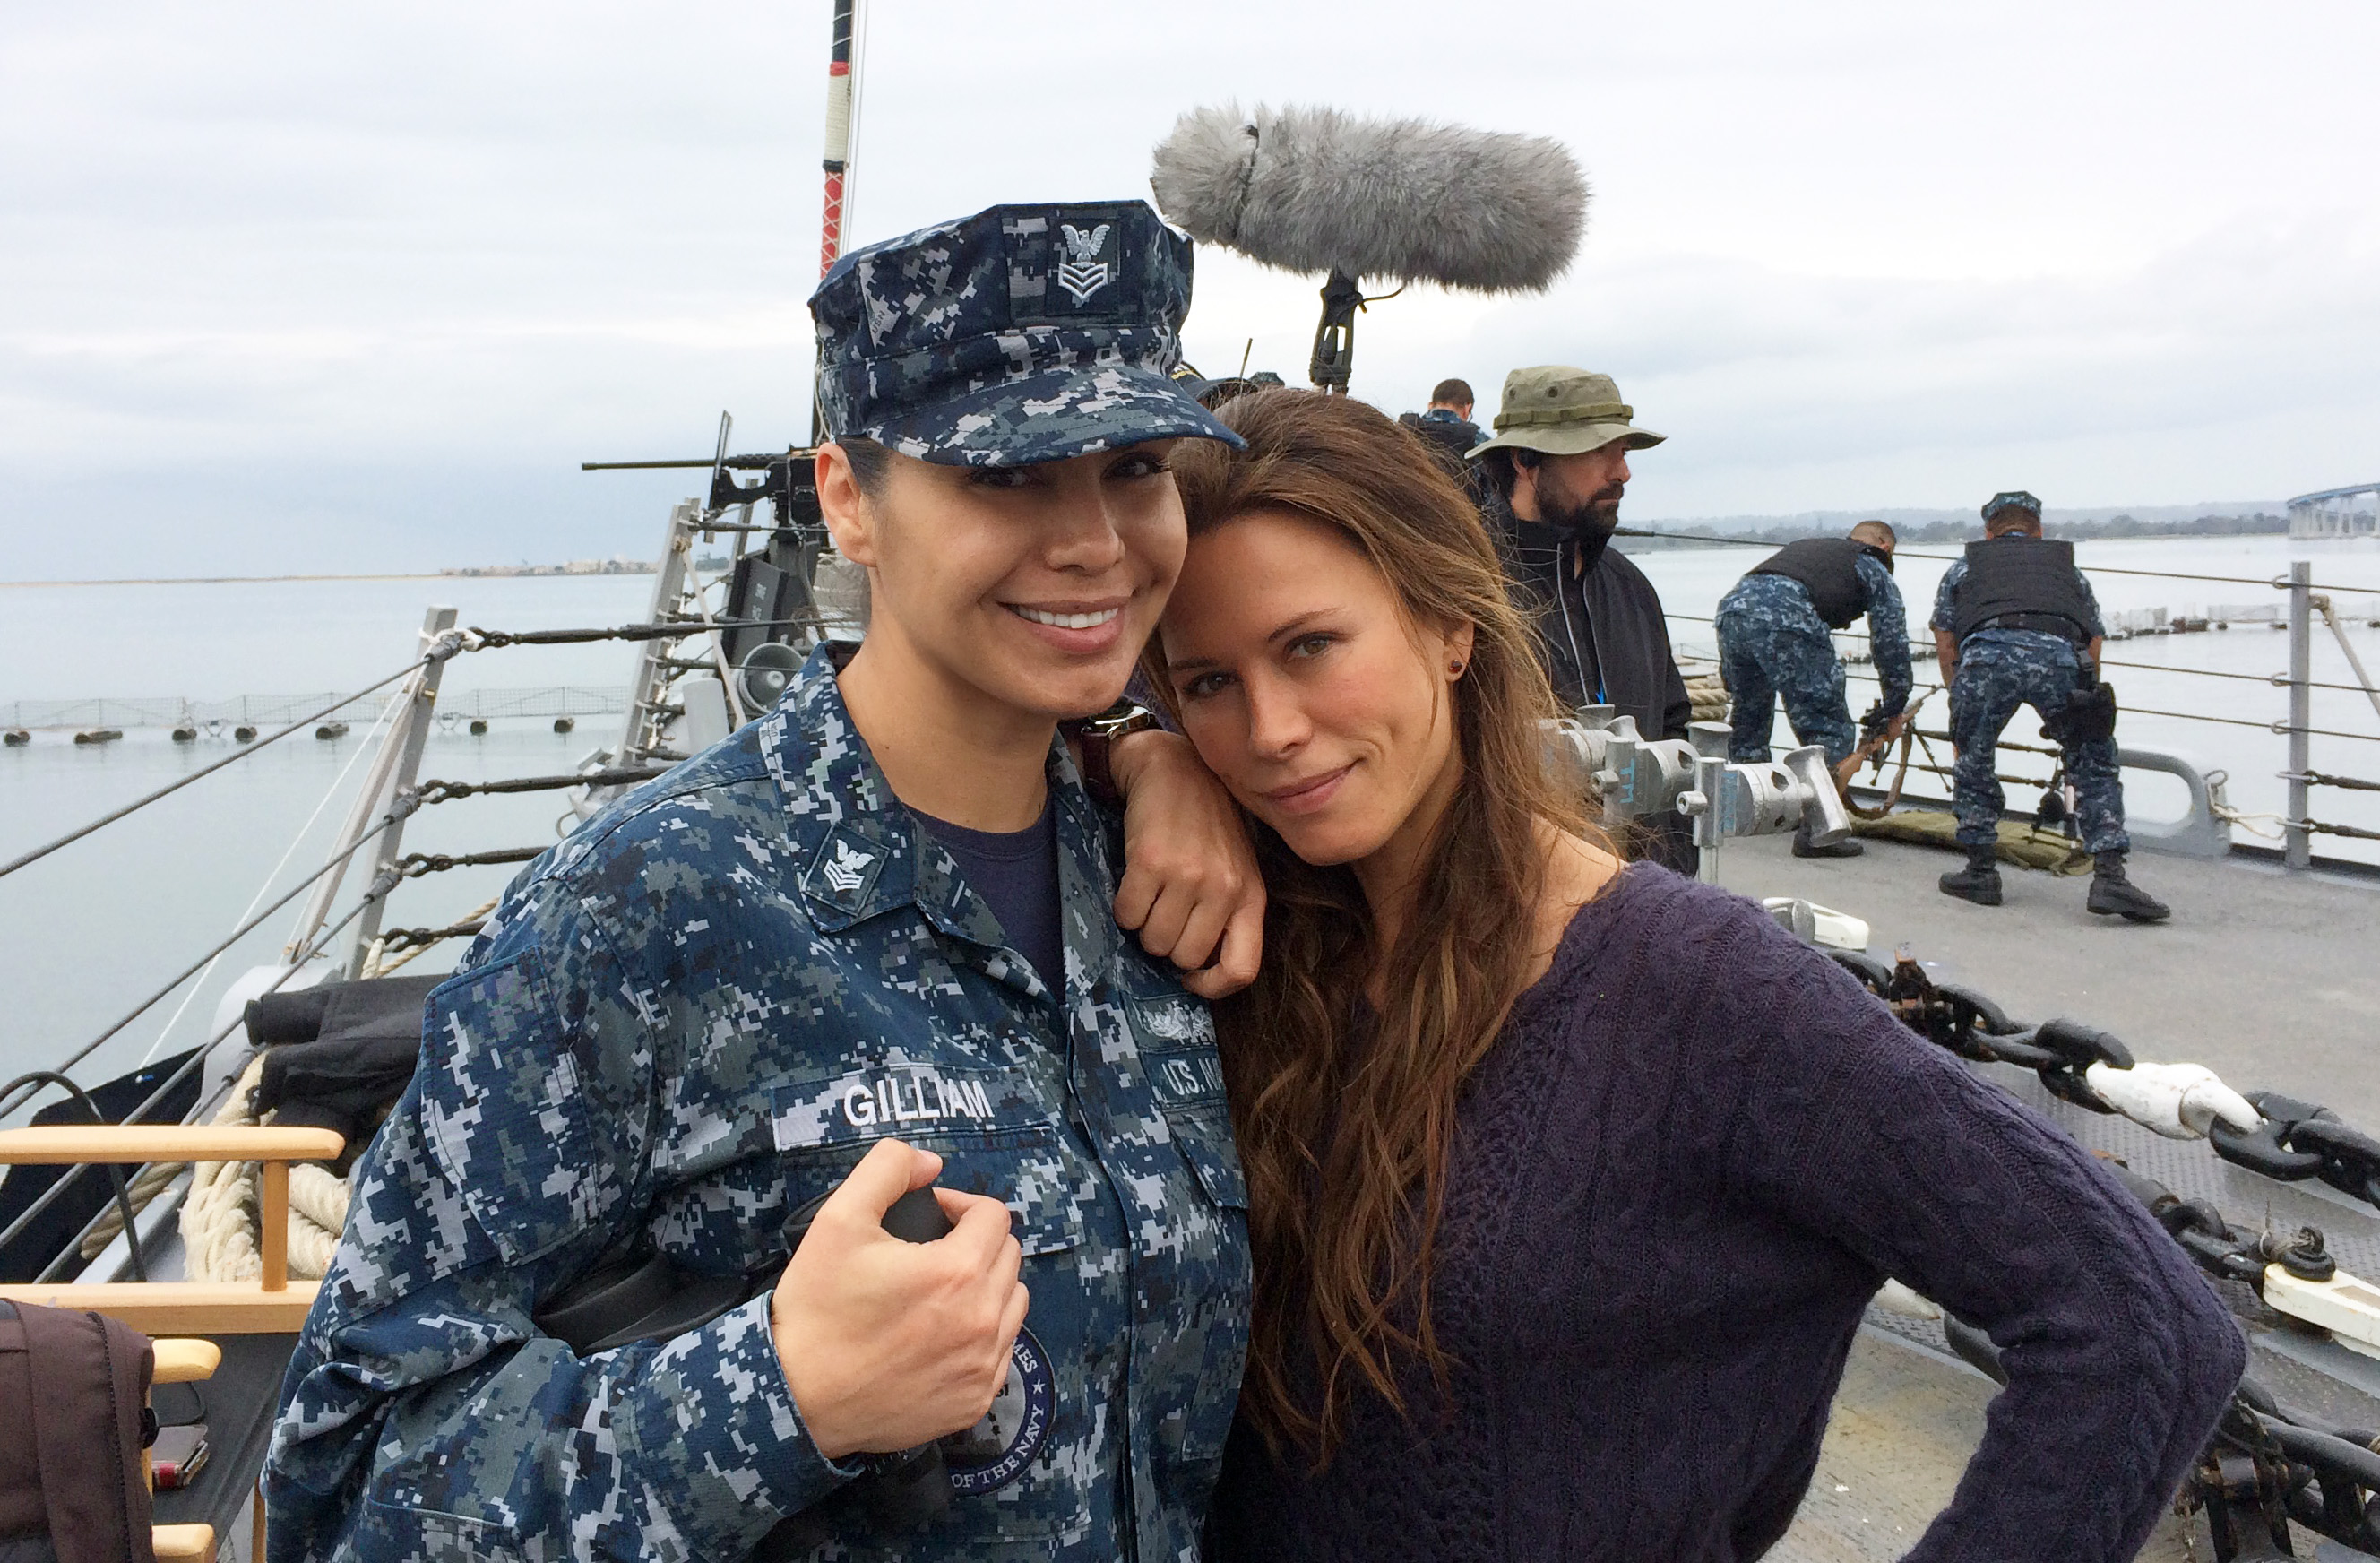 On location for the filming of The Last Ship at the Naval Base in San Diego, CA.